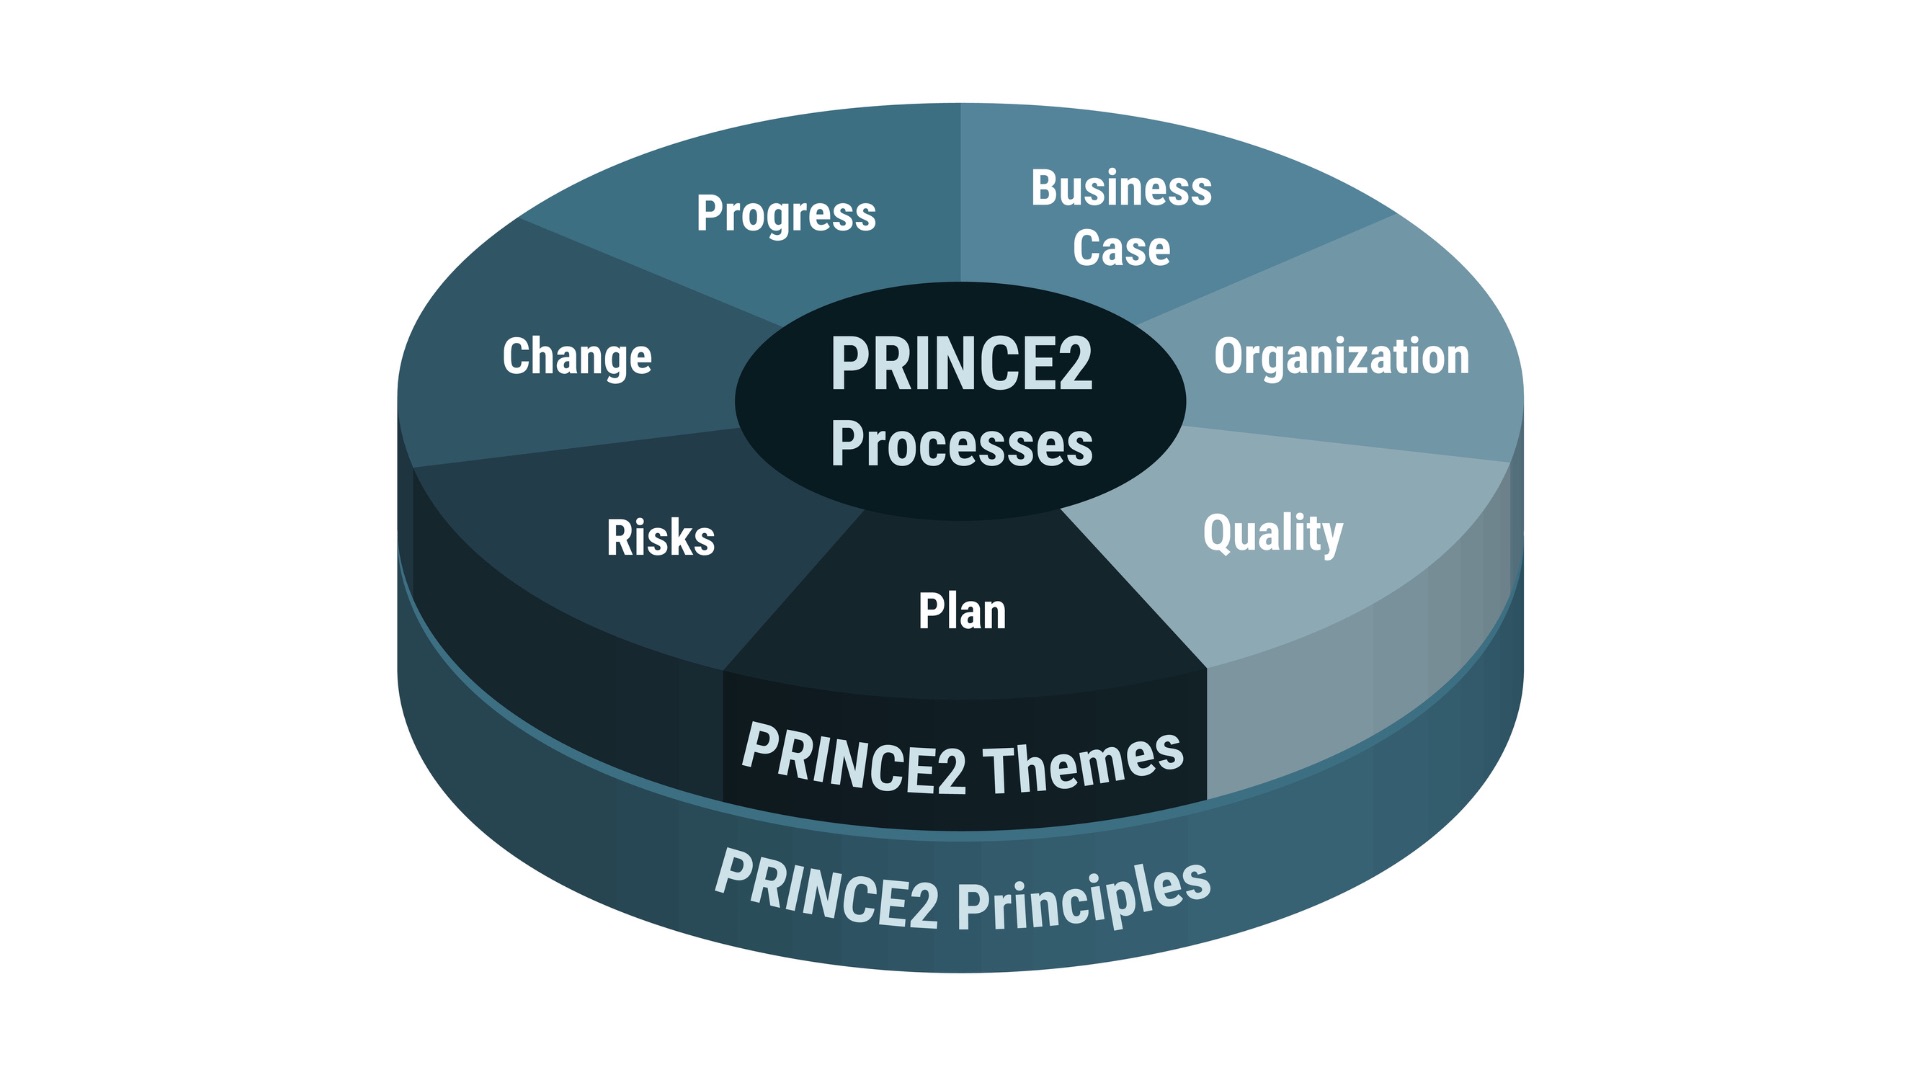 LFY - Work - Blog Image 1920 x 1080 - Exploring the New Features of PRINCE2 7th Edition A Comprehensive Guide